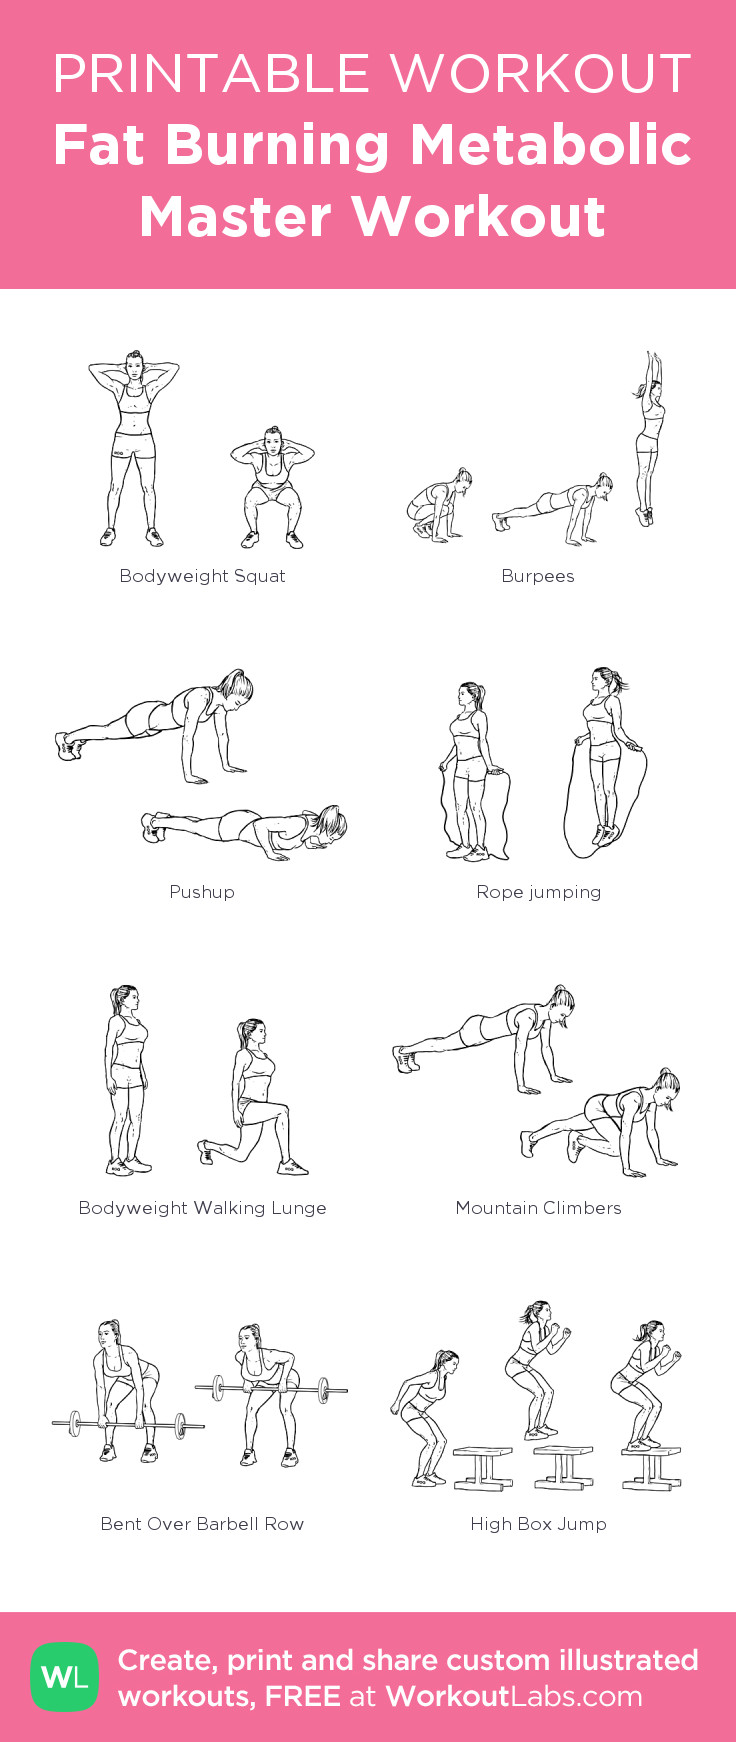 Weight Loss Exercises At Home Fat Burning
 Pin on Free Workouts Try & Print